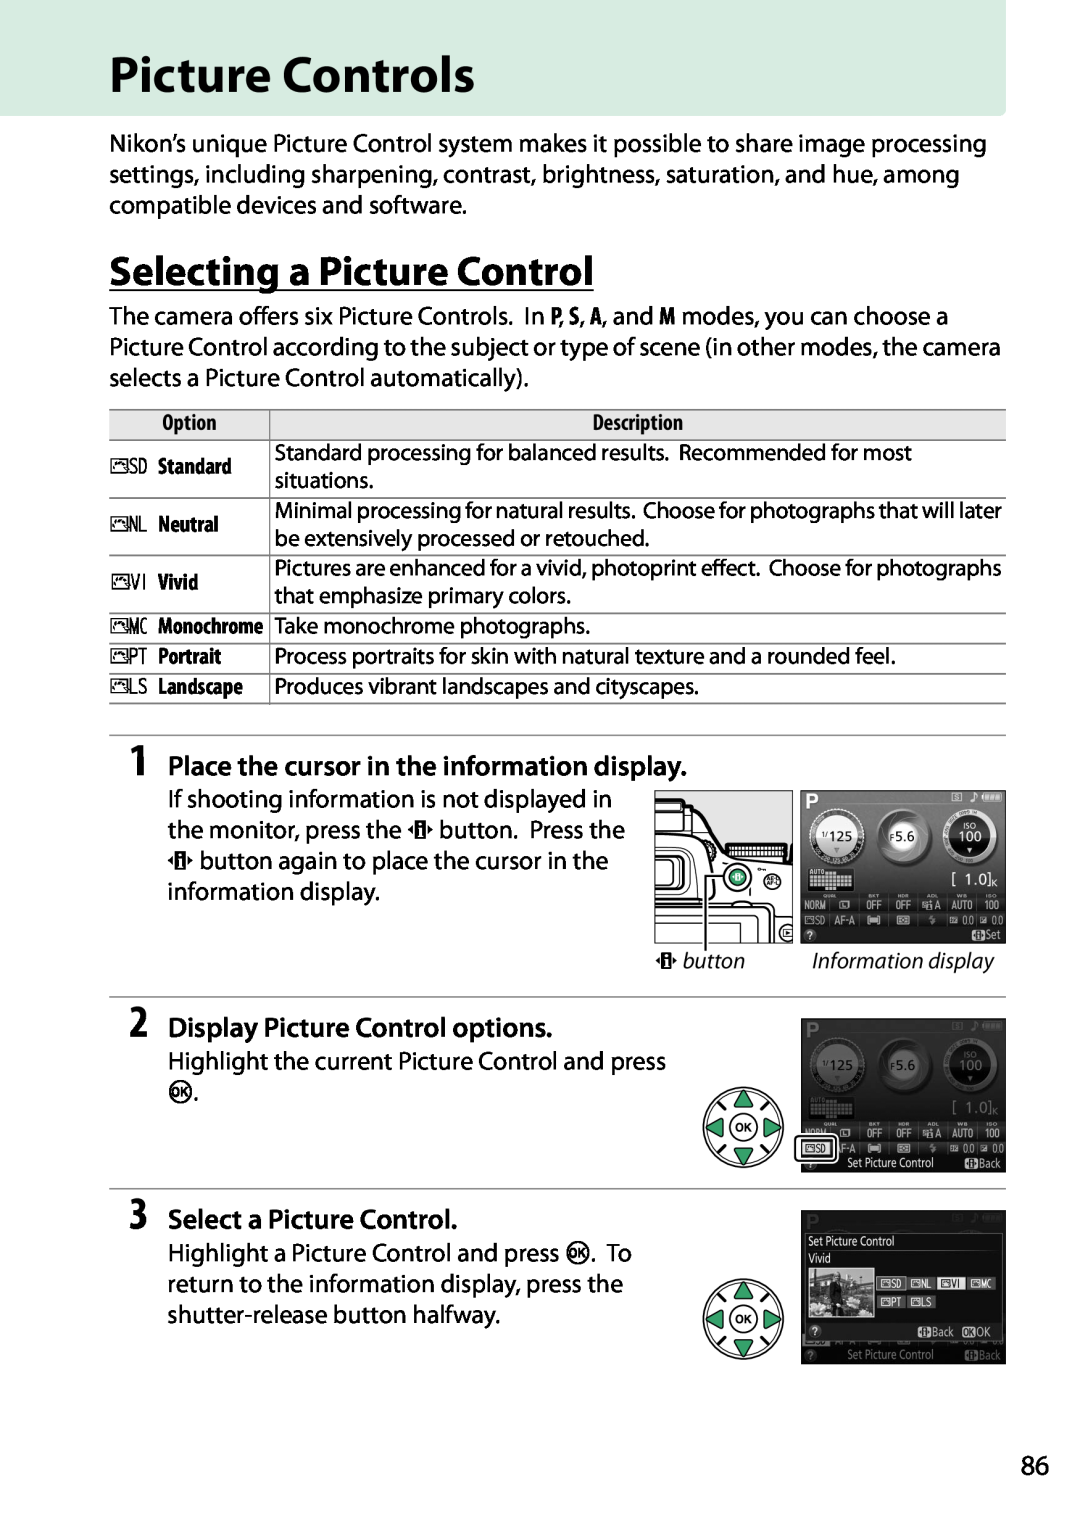 Nikon D5200 (18-105mm Kit), 1501, 1507, 1511 Picture Controls, Selecting a Picture Control, Display Picture Control options 